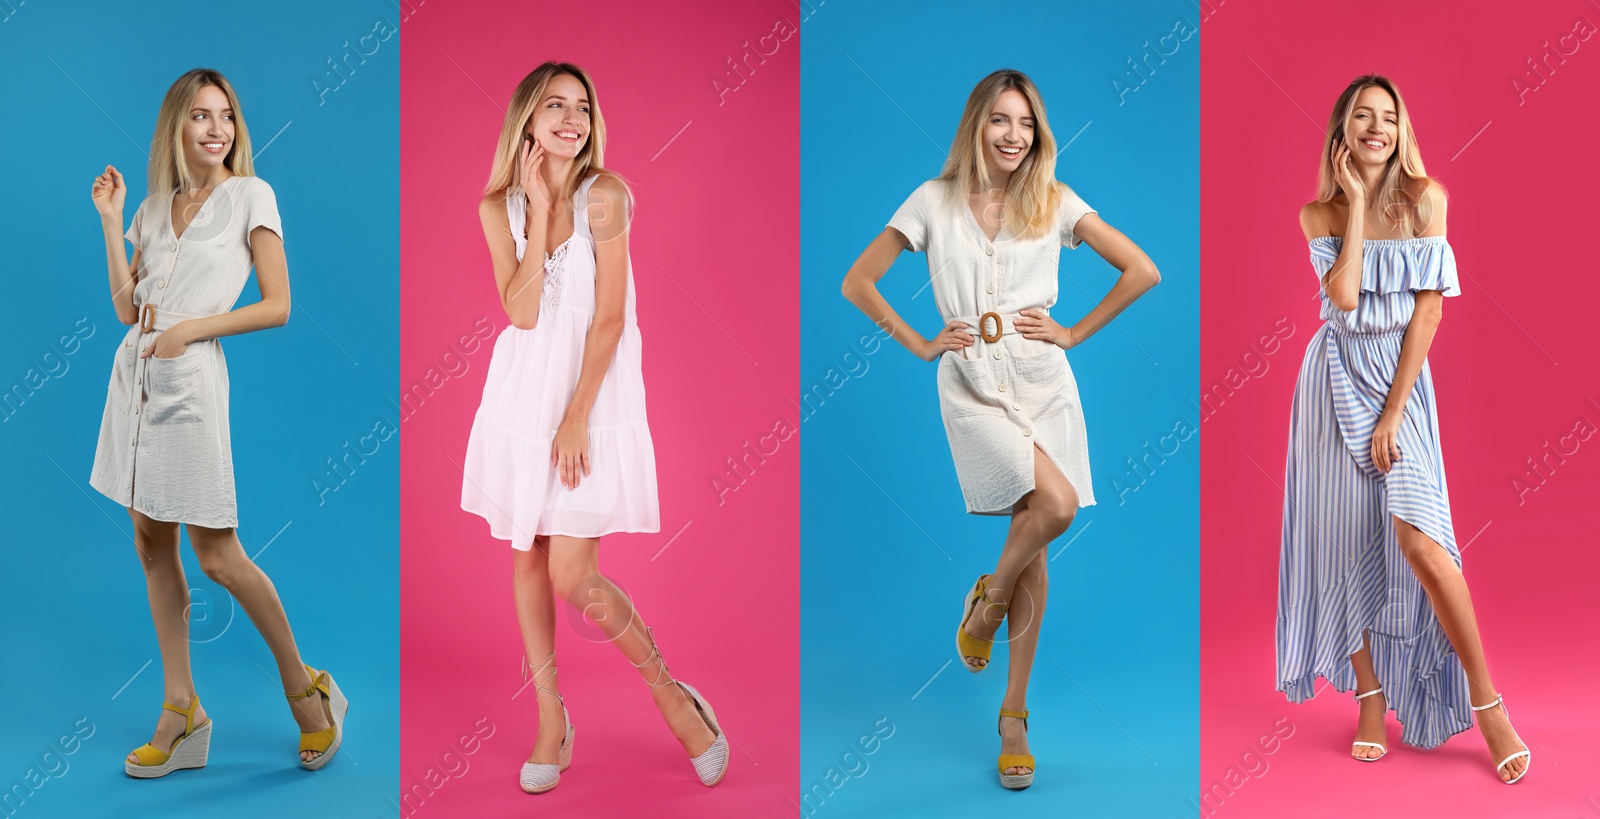 Image of Collage with photos of young woman wearing different dresses on bright backgrounds